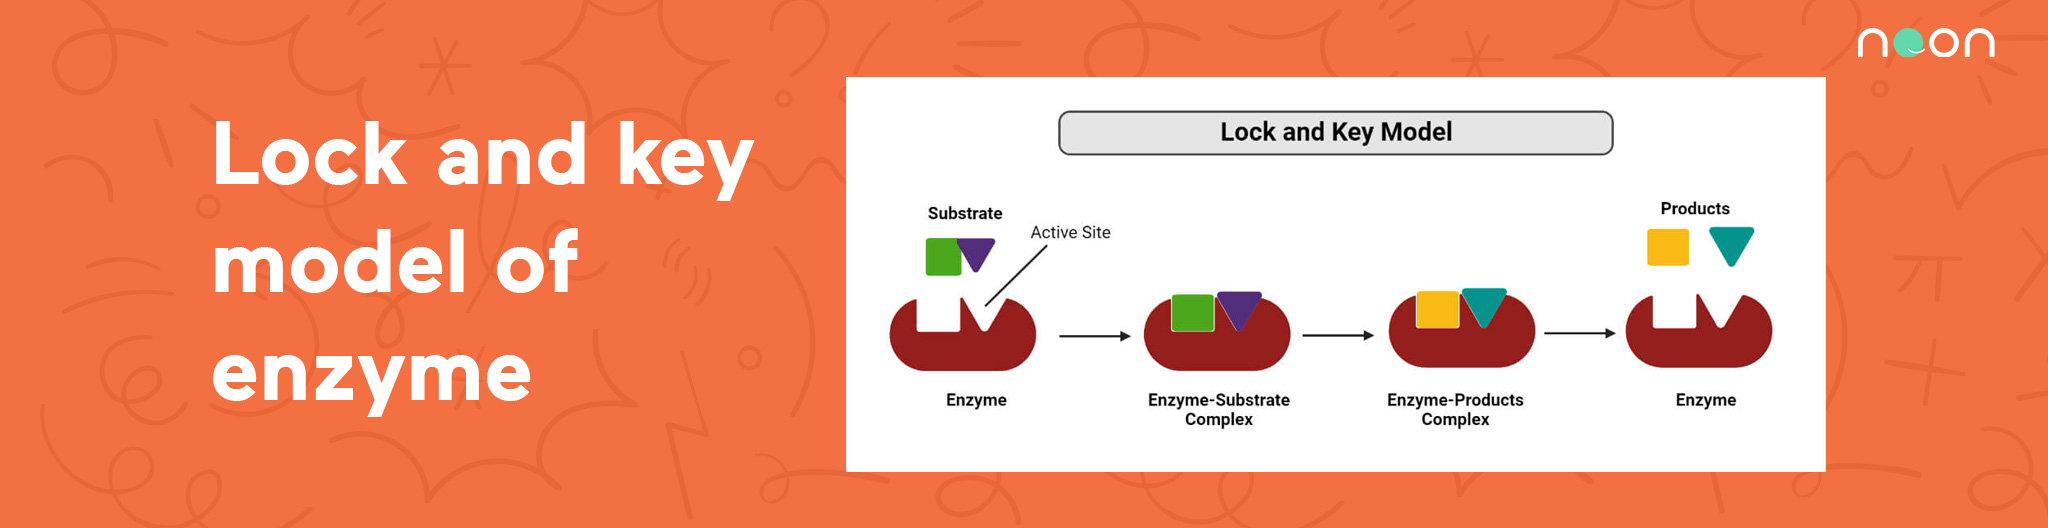 Lock and key model of enzyme